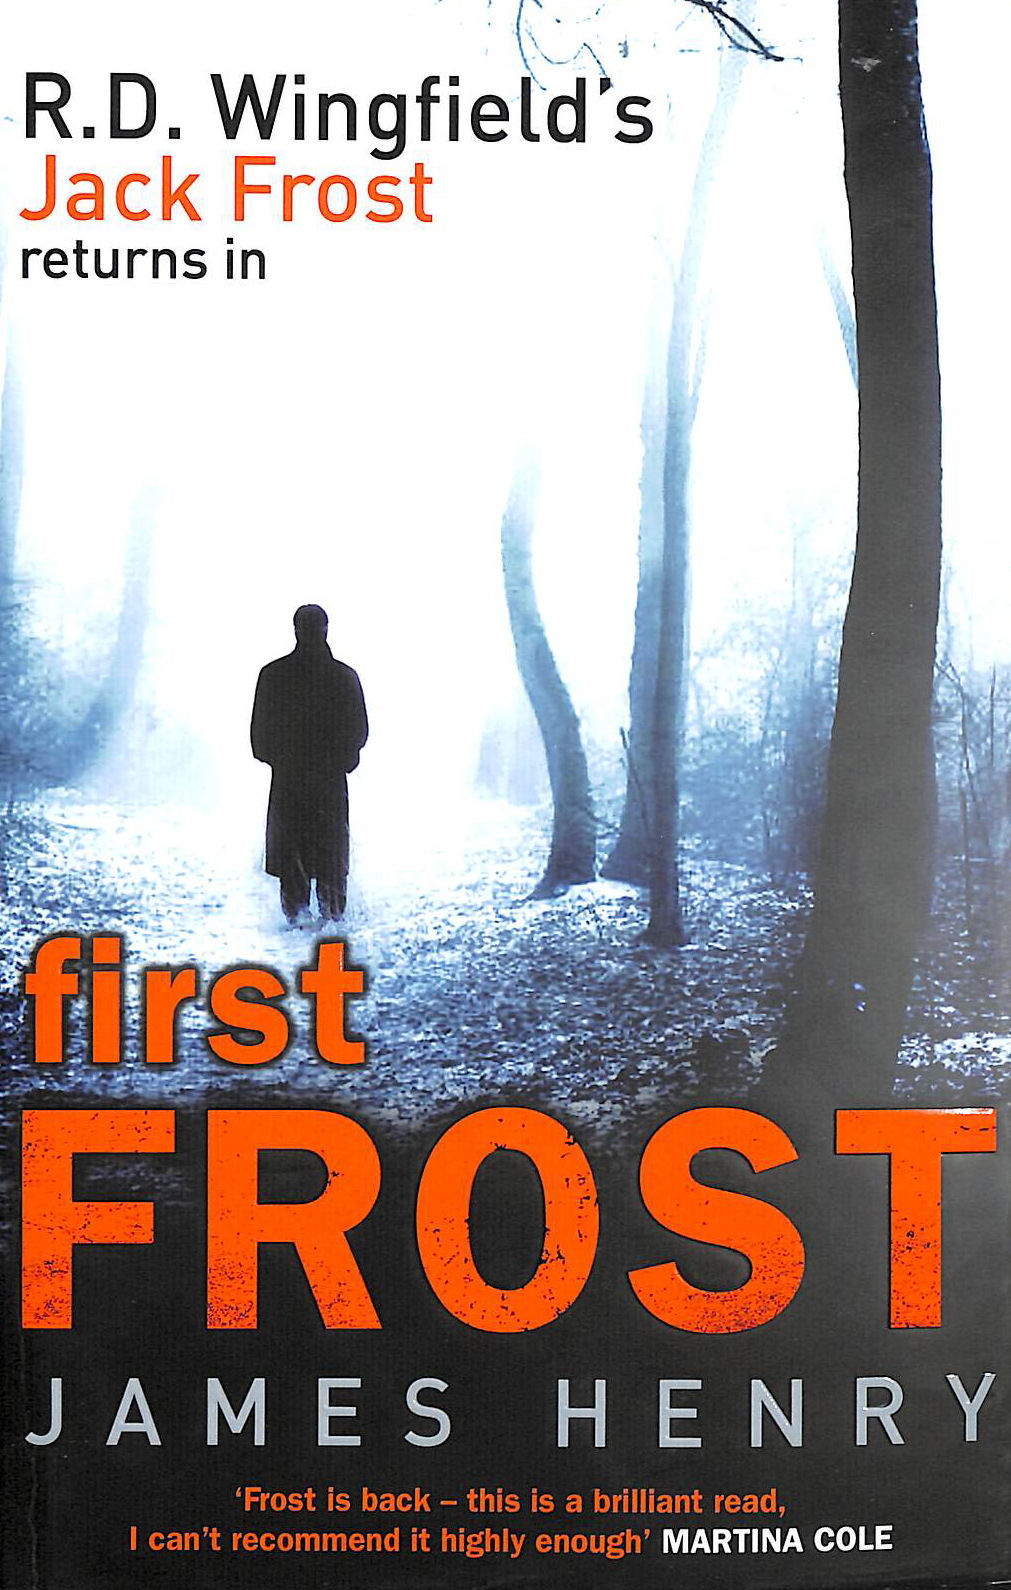 HENRY, JAMES - First Frost: DI Jack Frost series 1